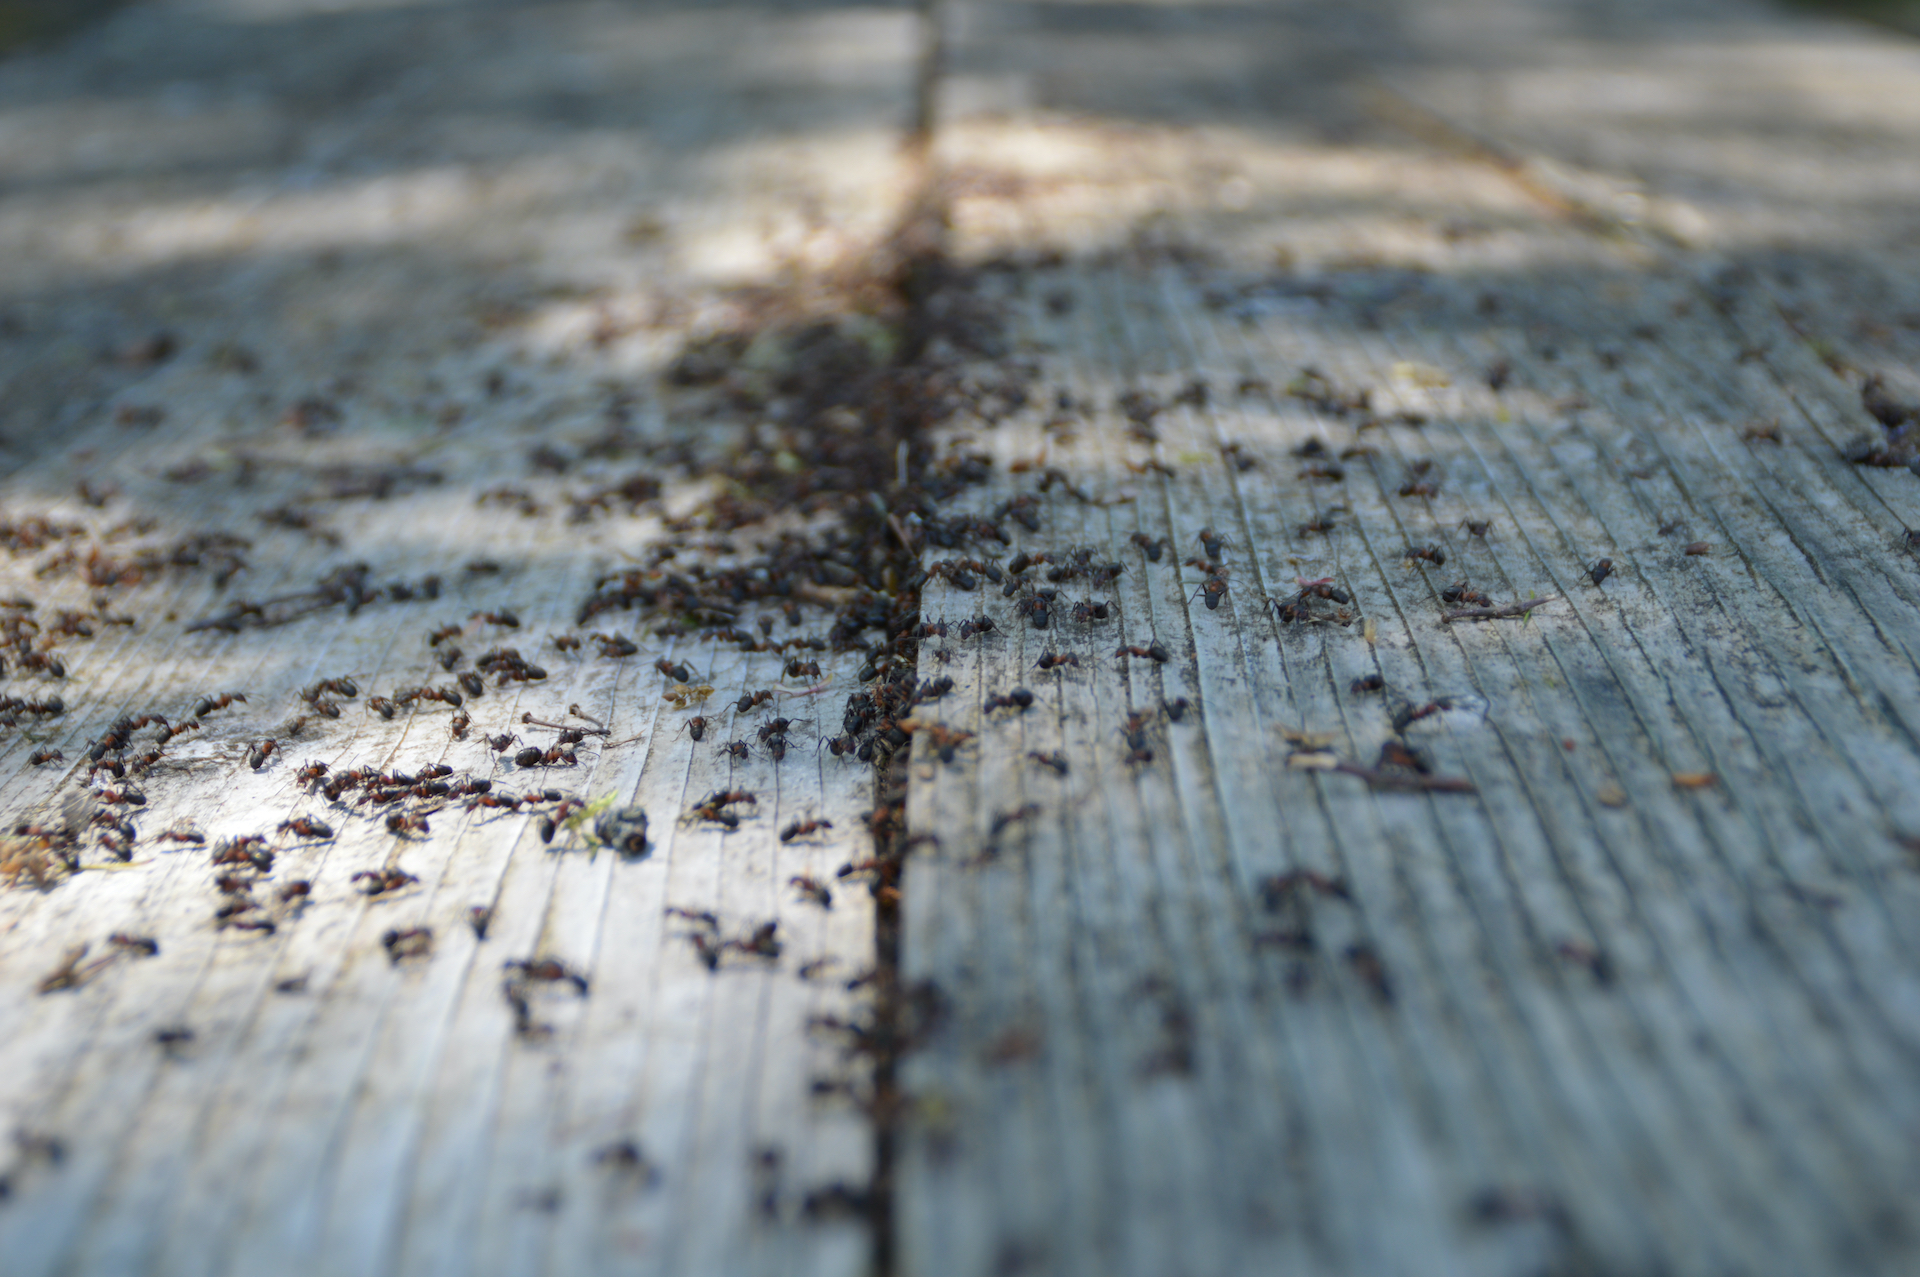 group of dead ants on the wooden floor after ant control by professional